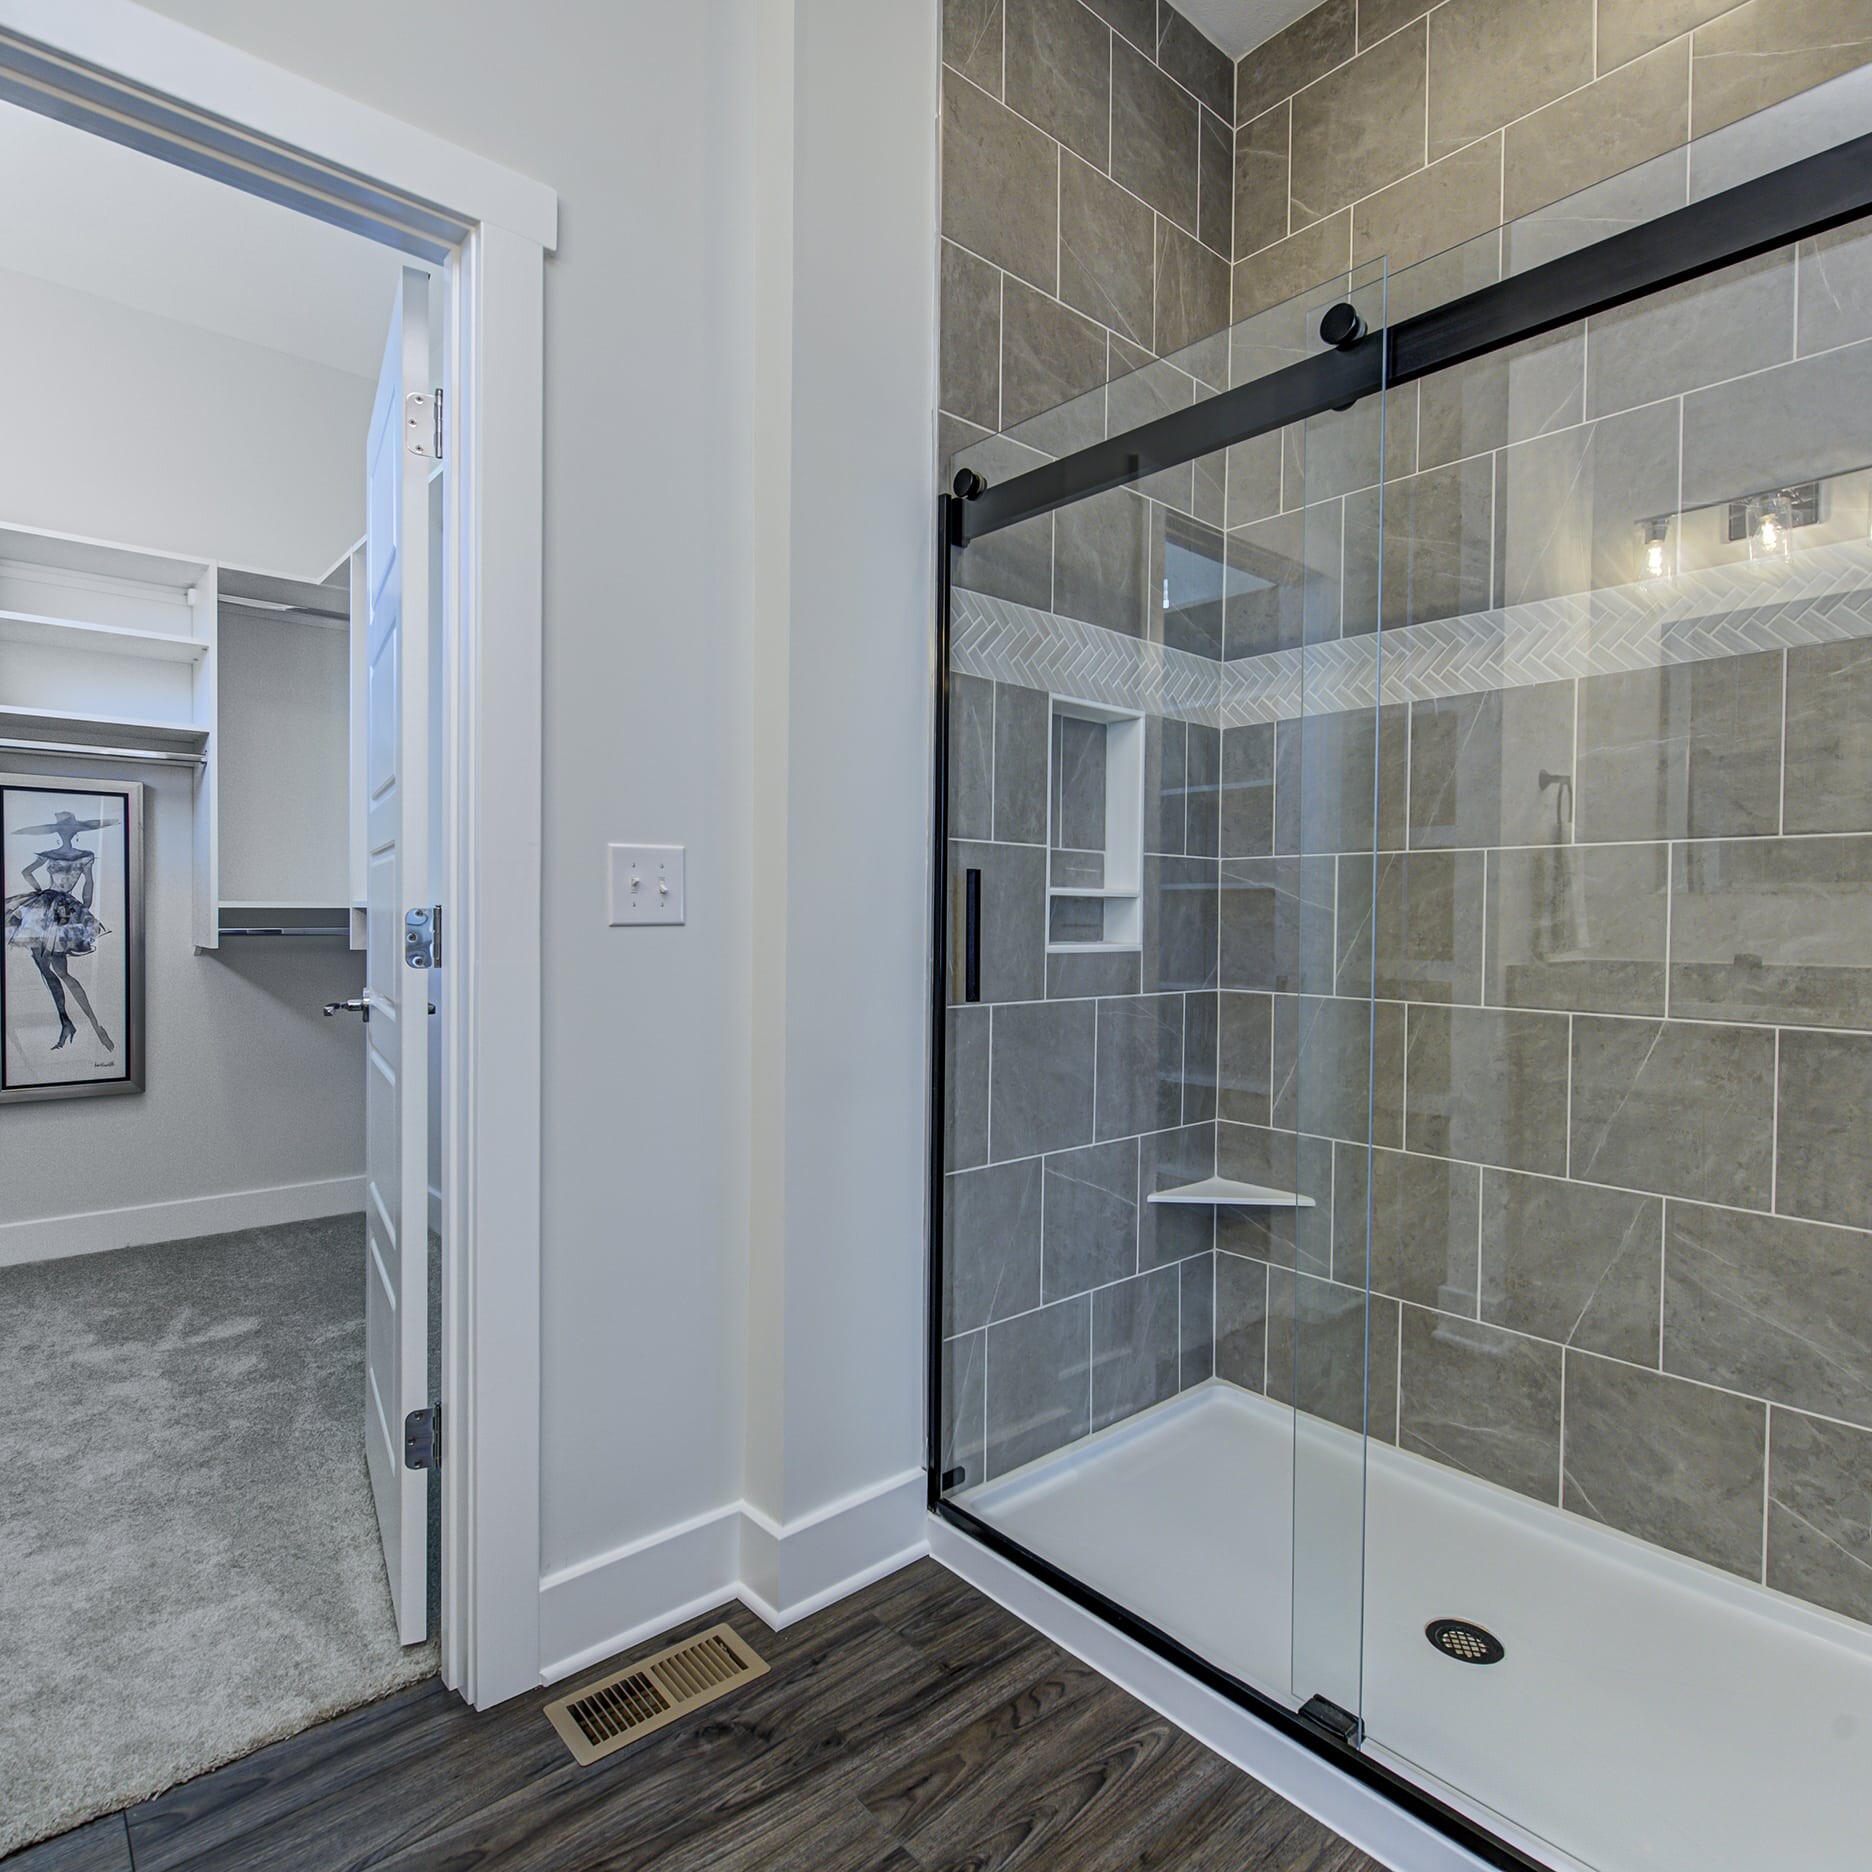 A bathroom with a glass shower door and a walk in closet.